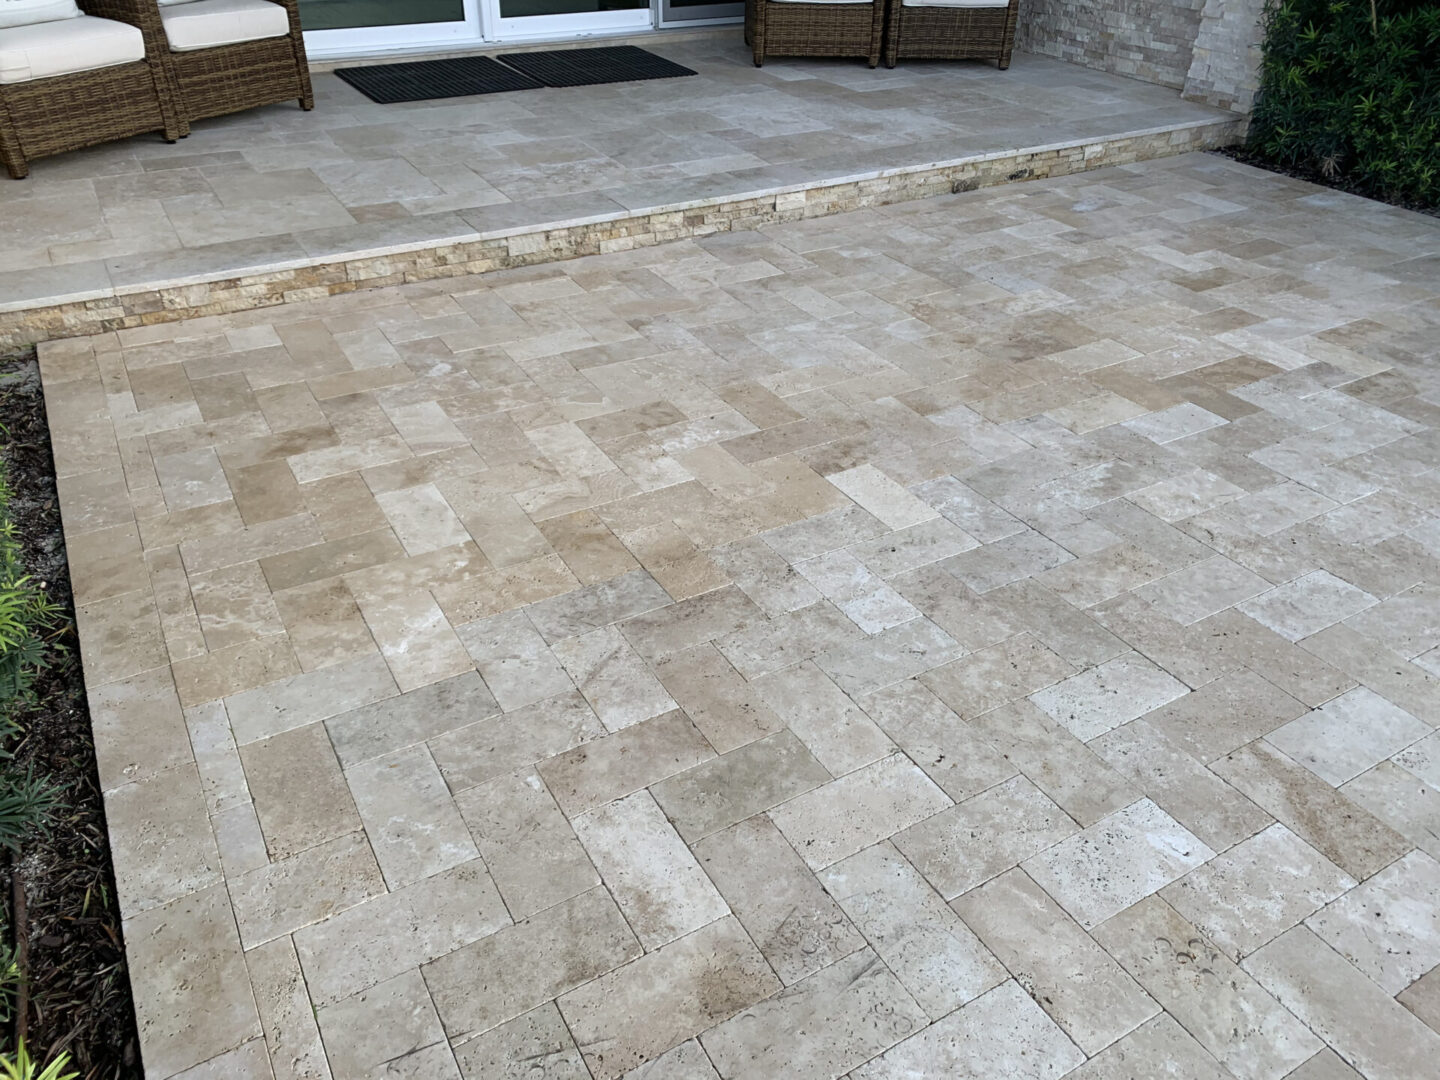 Beige stone tile patio with a step leading up to a seating area with wicker furniture and a sliding glass door.